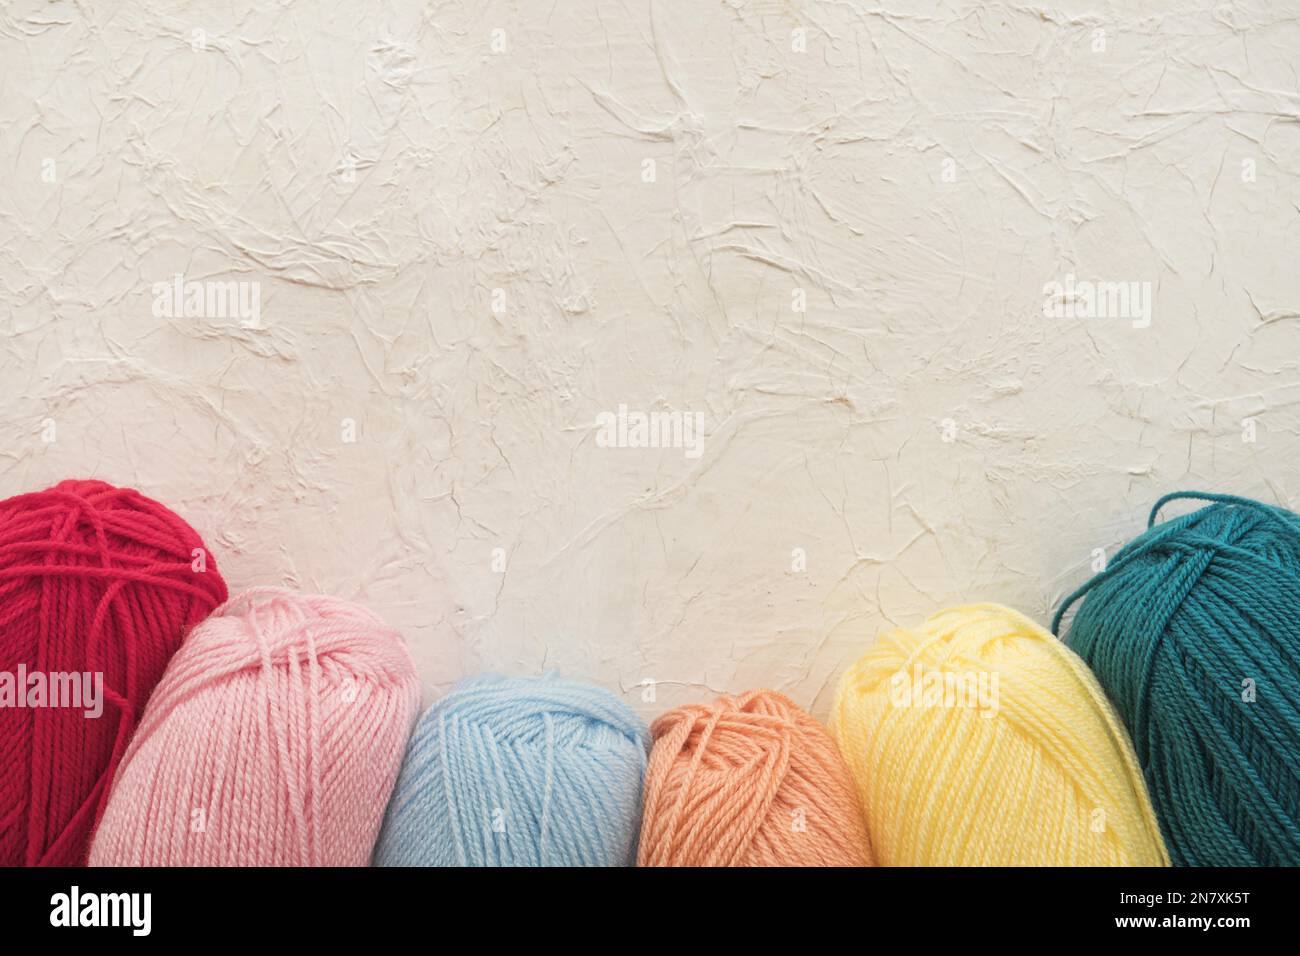 collection soft yarn Stock Photo